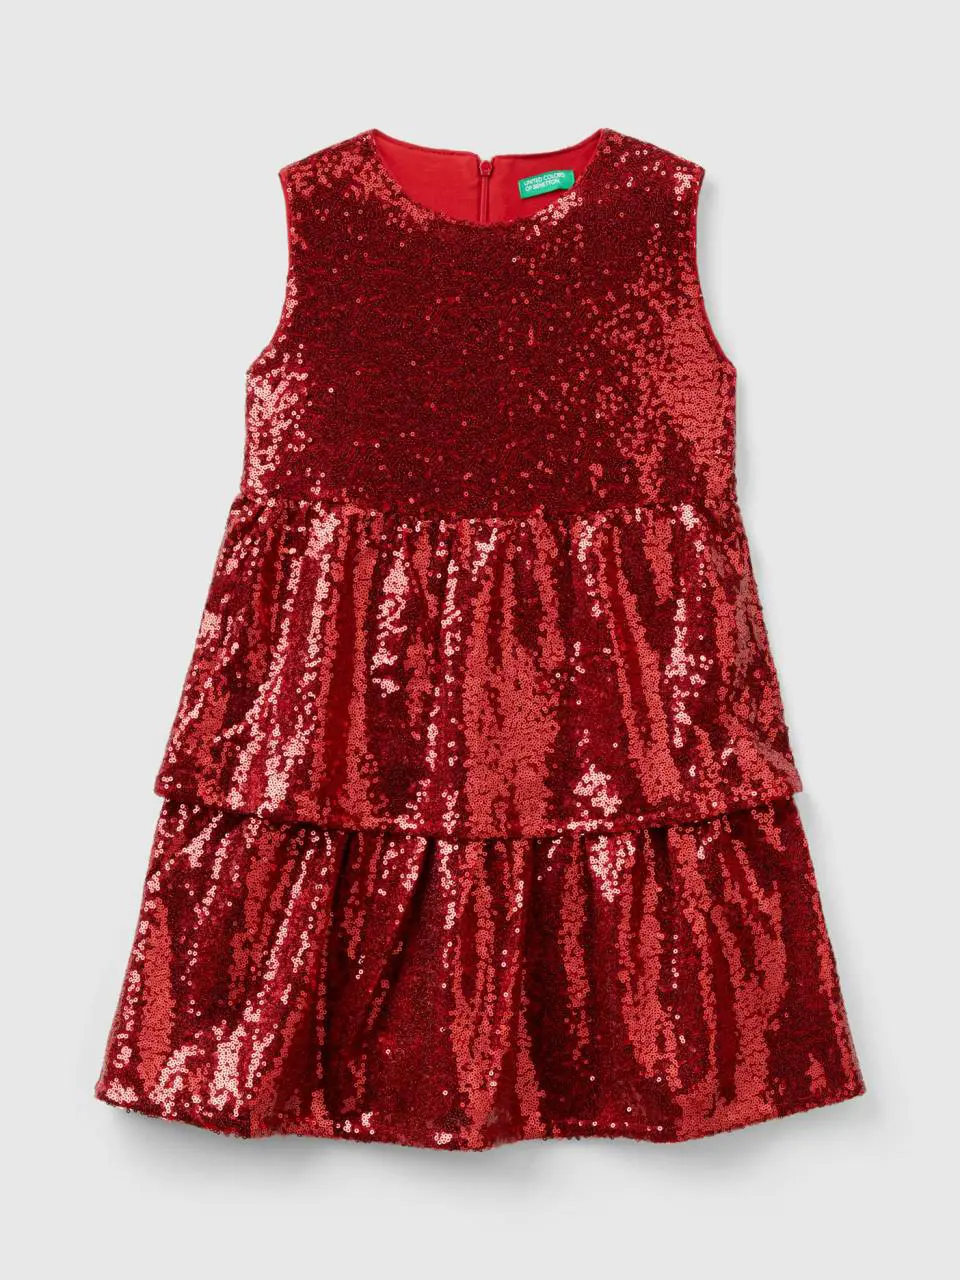 Benetton dress with sequins. 1